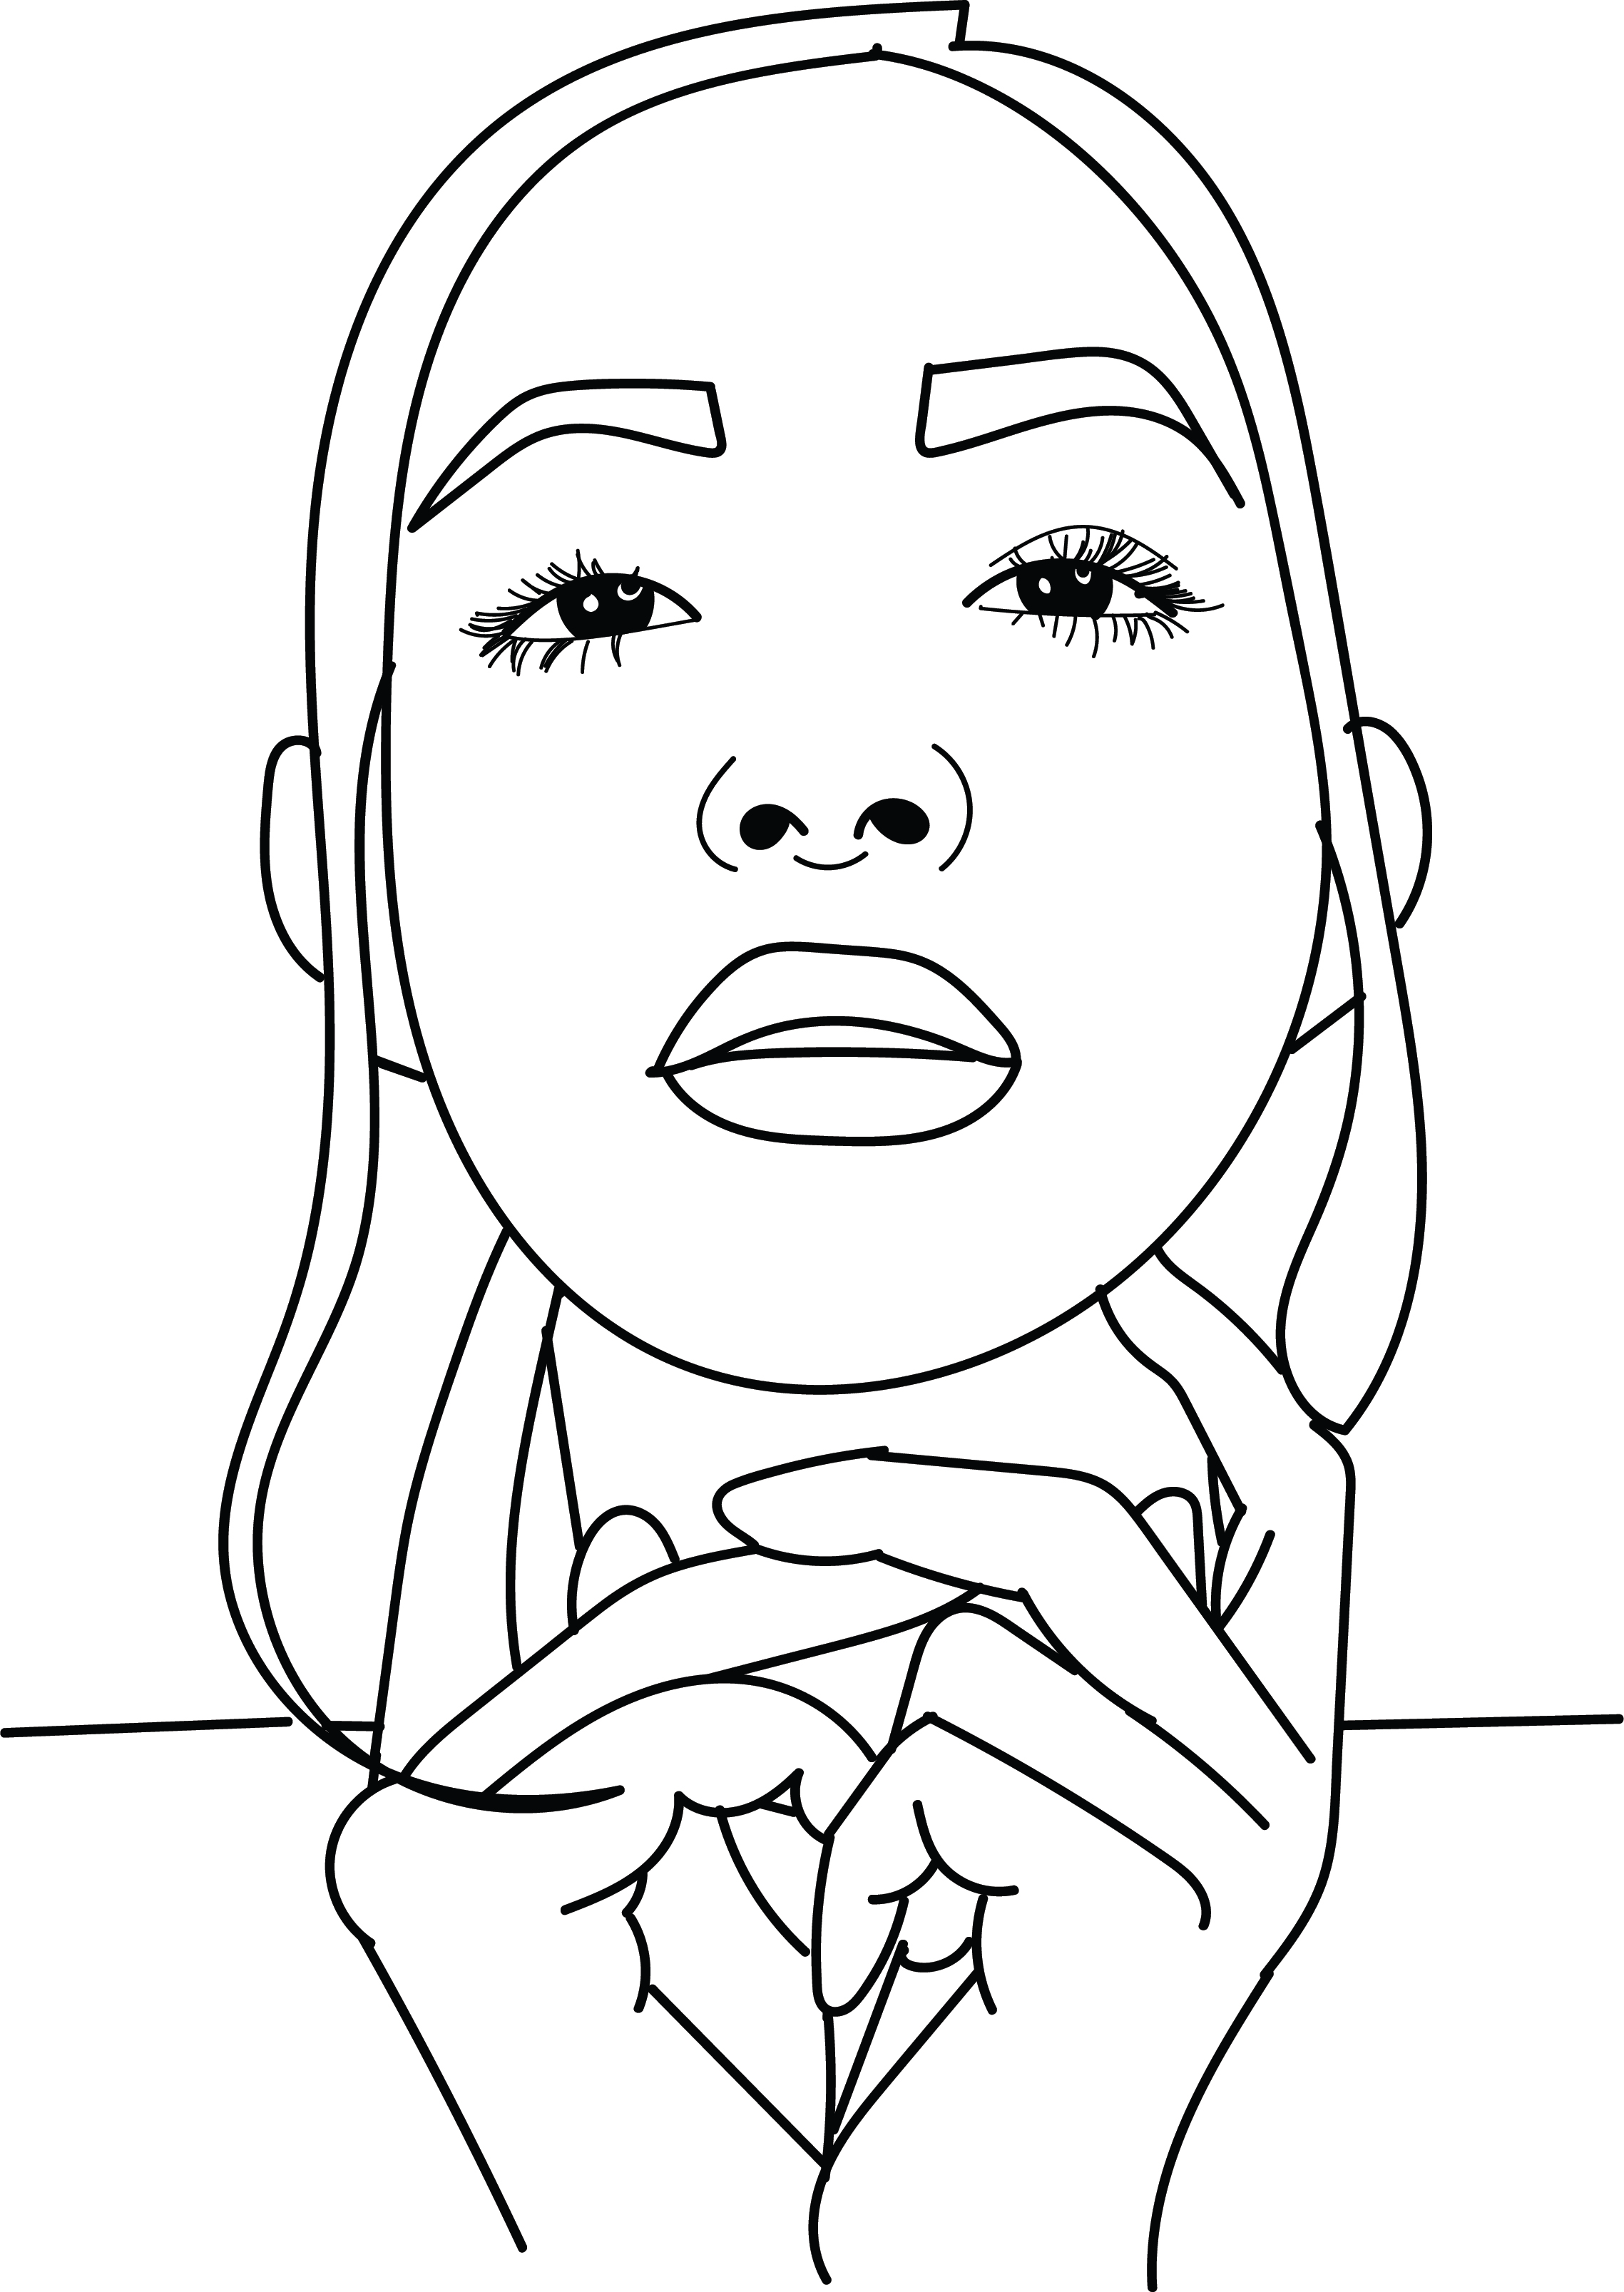 Turn a picture into a coloring page by Artdromedaa   Fiverr